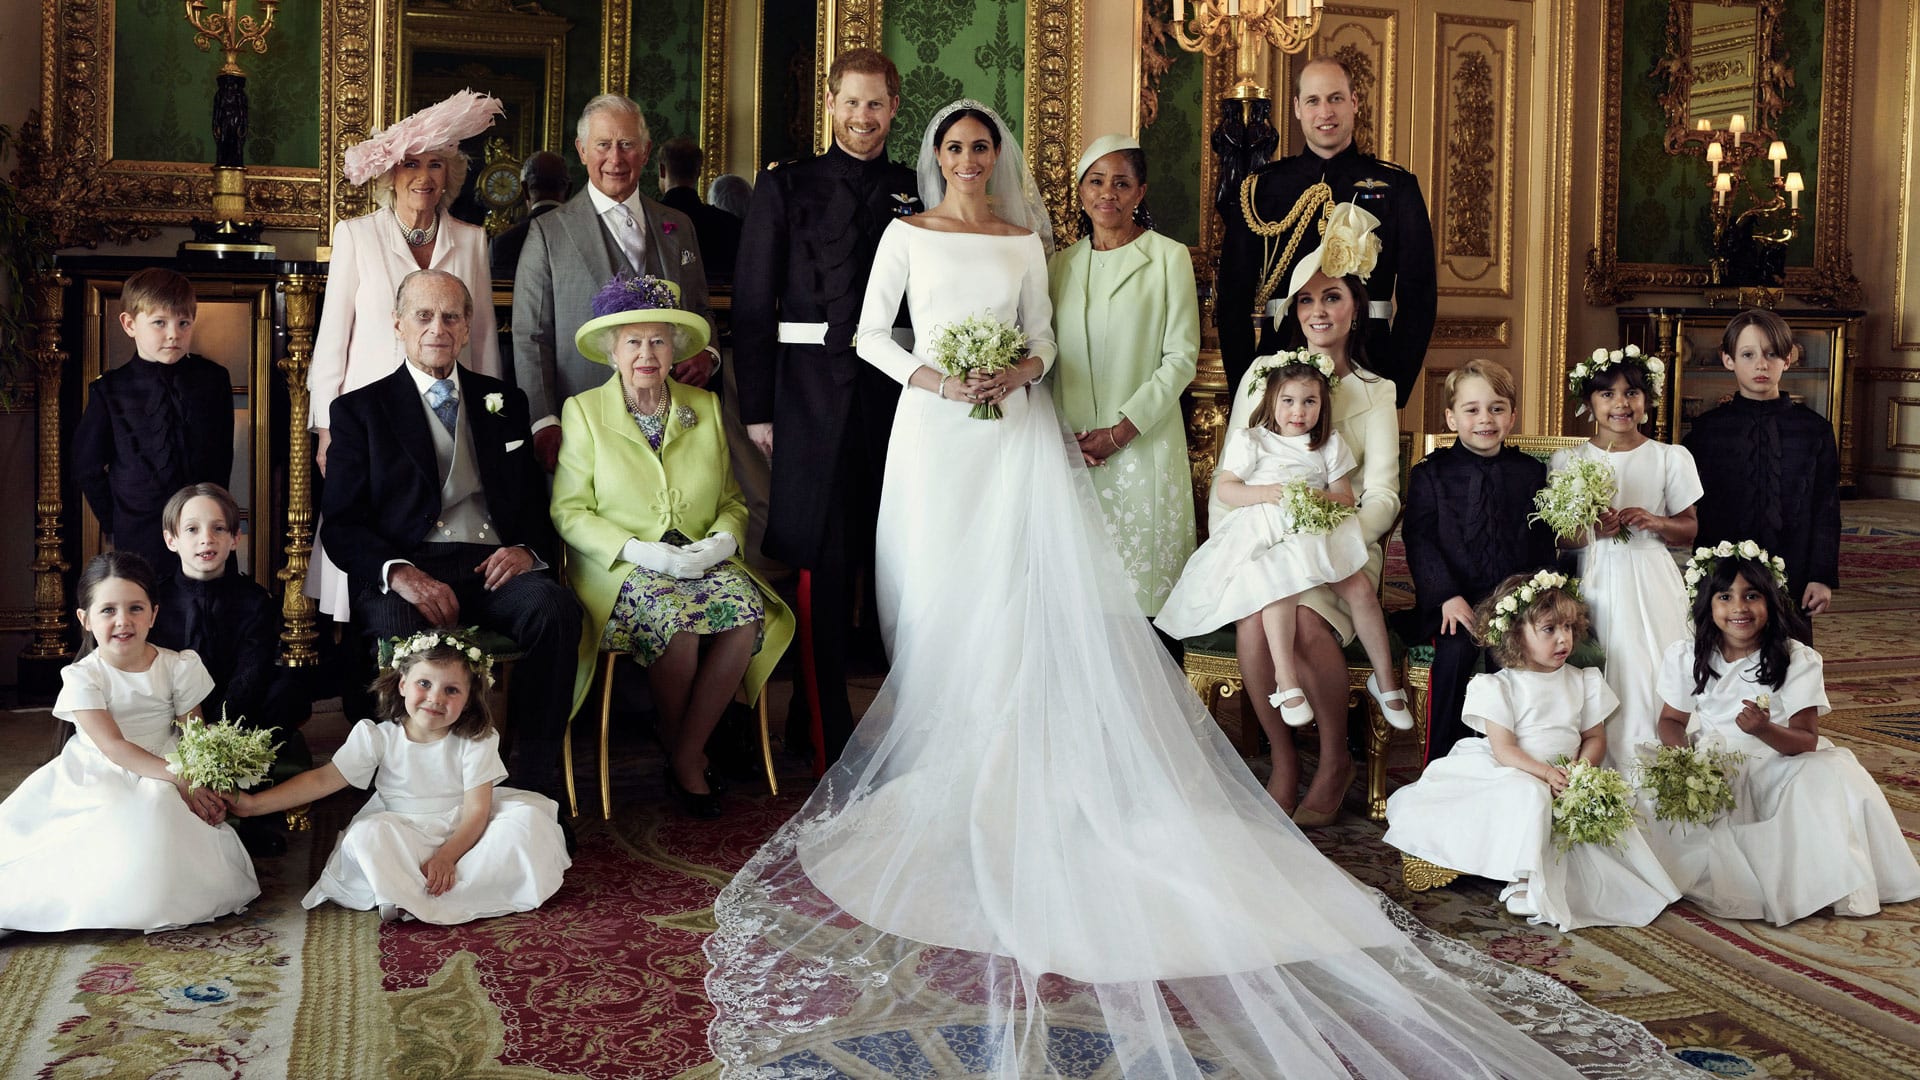 The royal wedding portraits are delightfully traditional